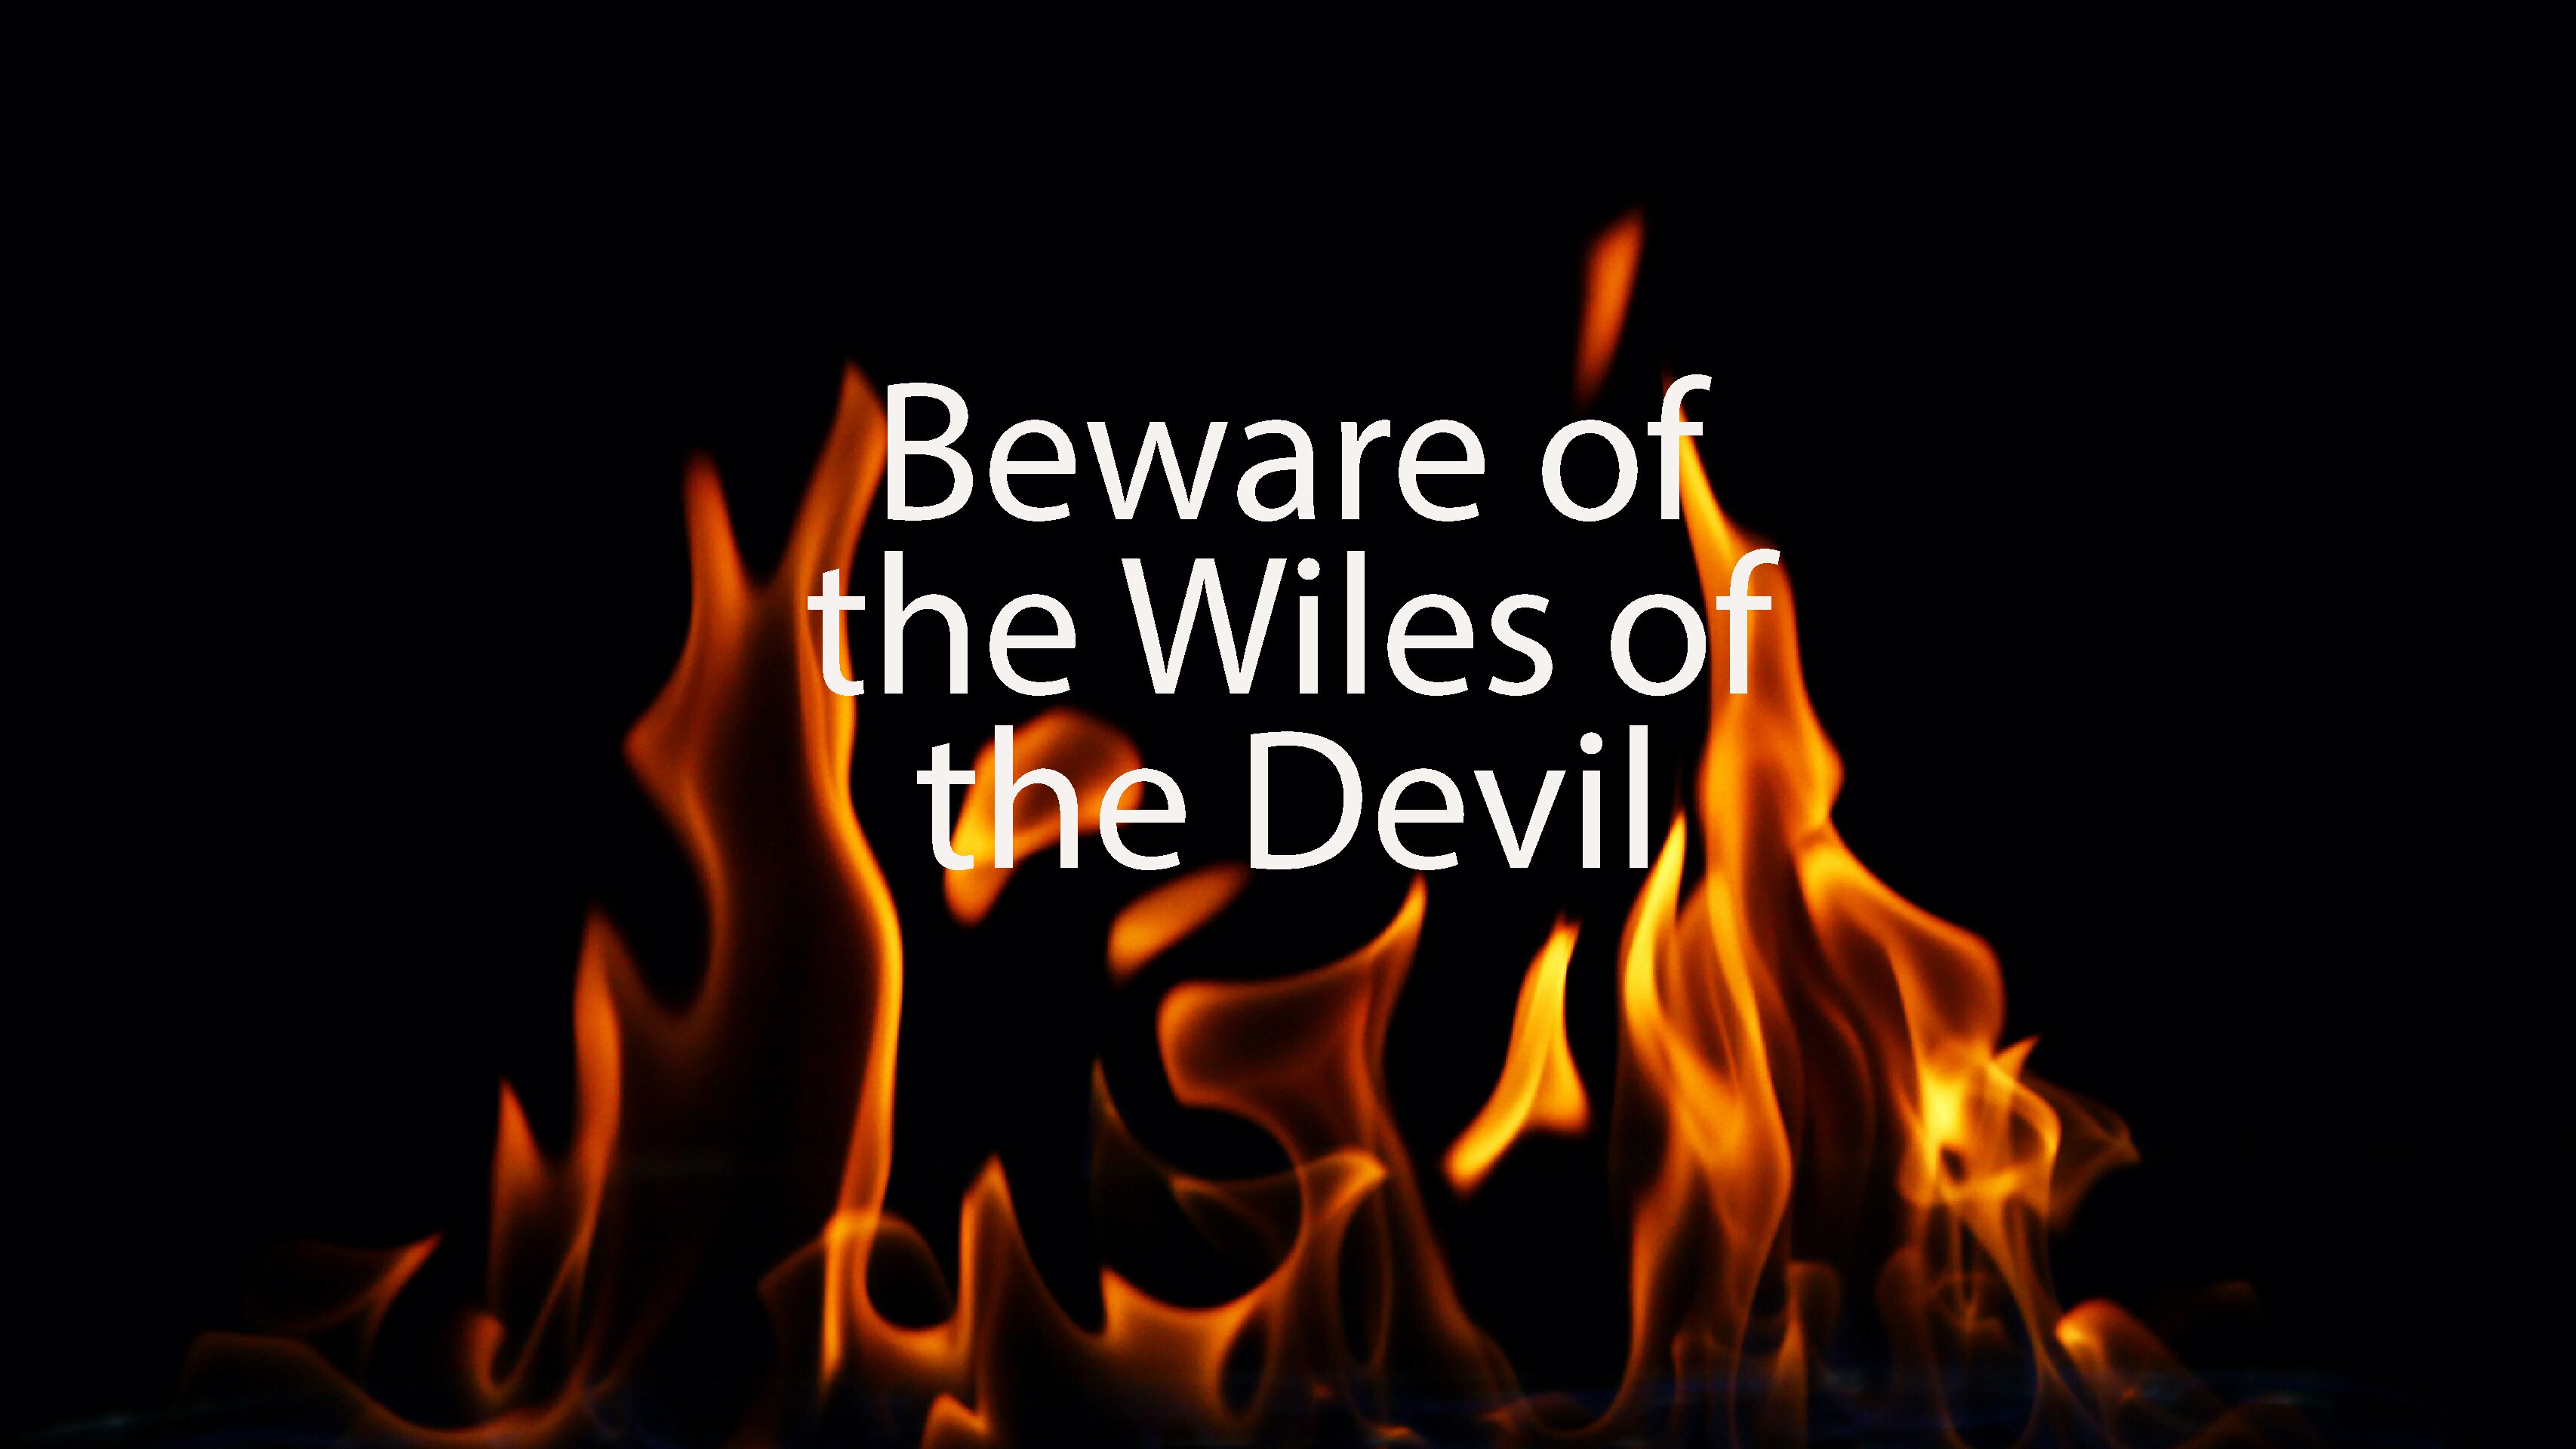 Beware of the Wiles of the Devil